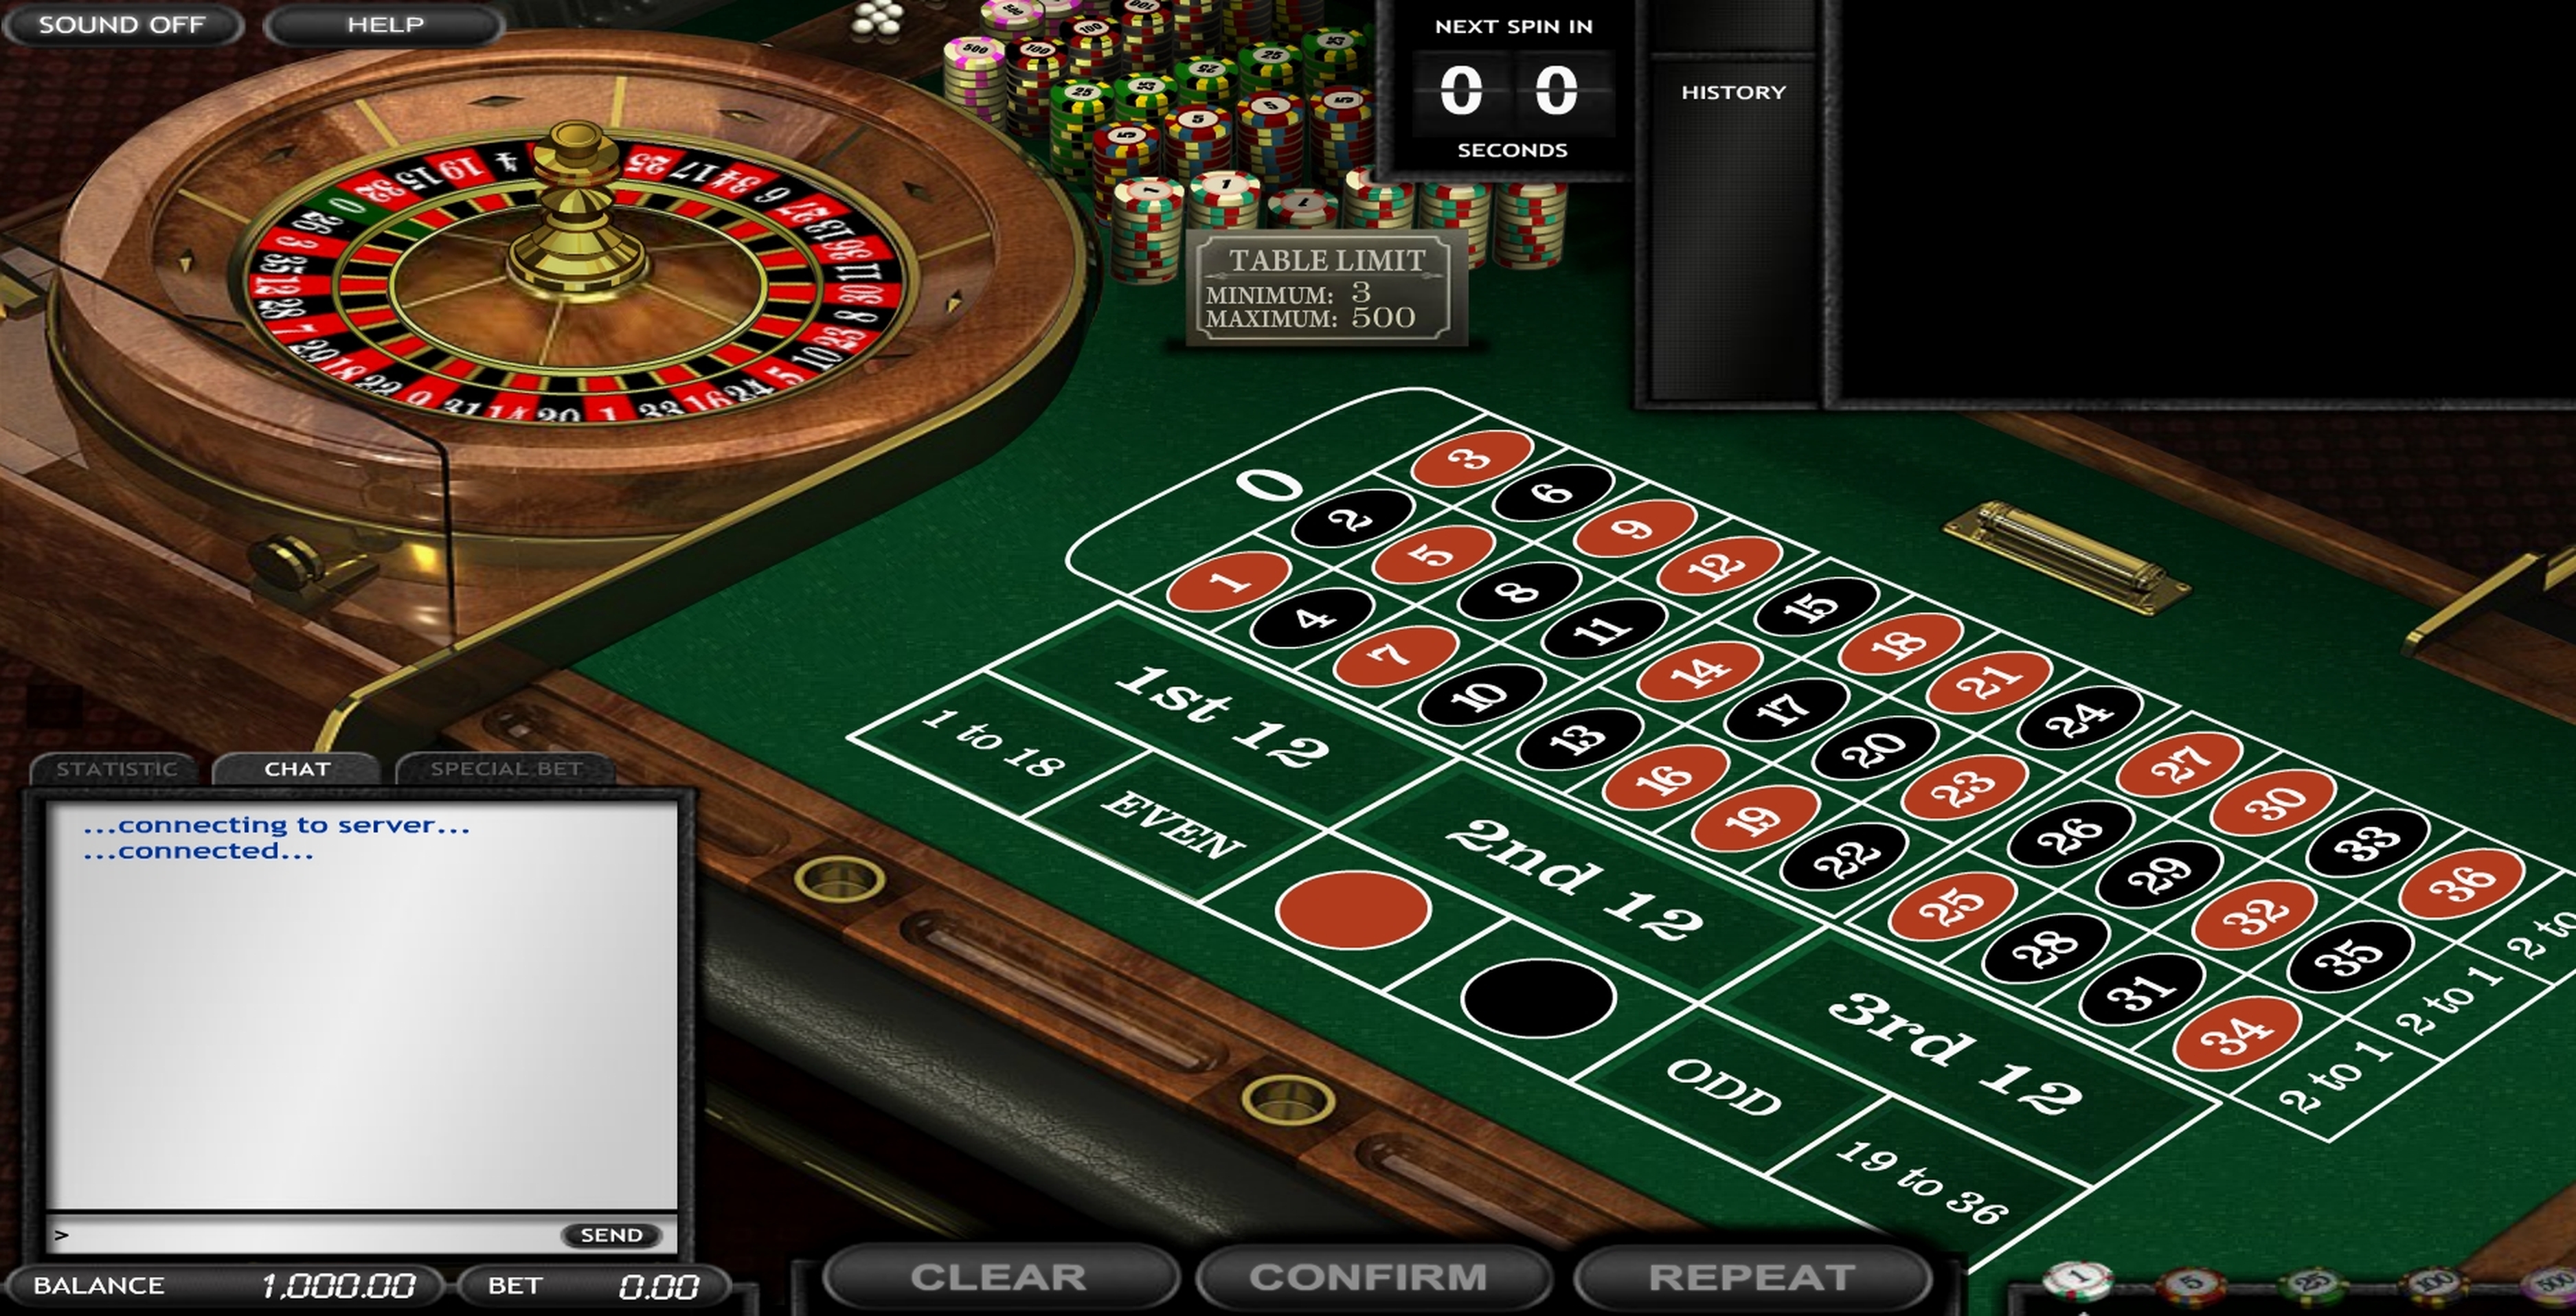 Reels in Common Draw Roulette Slot Game by Betsoft